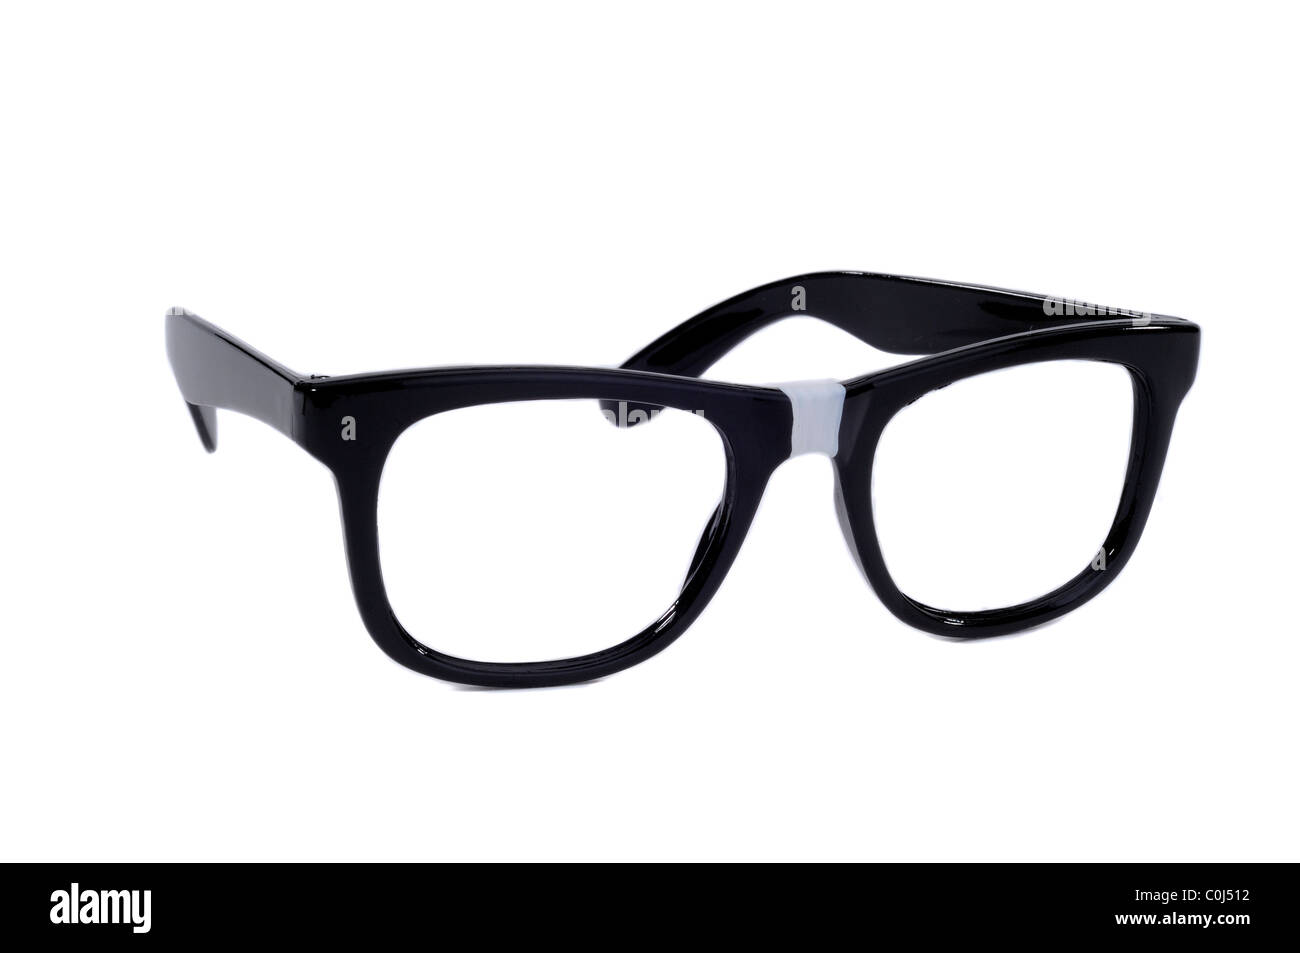 Pair Of Black Sixties Style Glasses With Tape On For A Geek Nerd Style Stock Photo